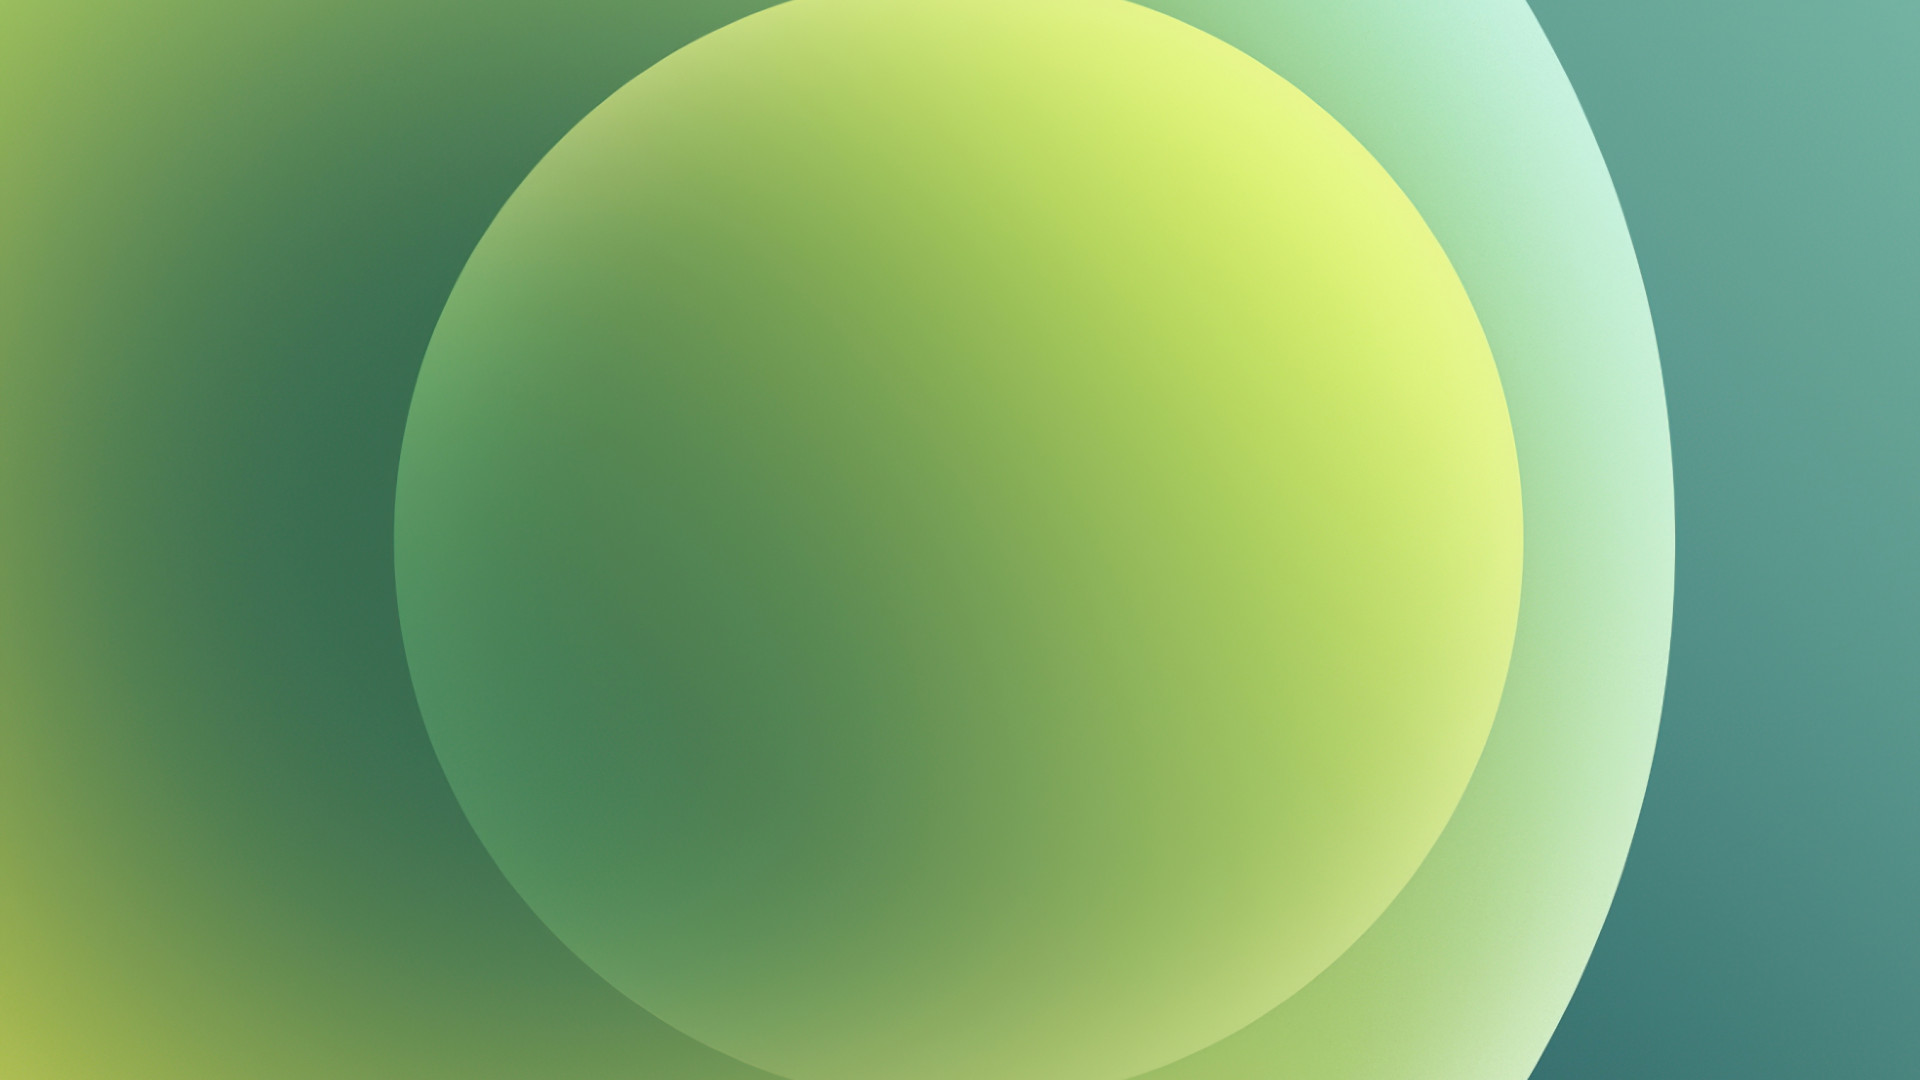 Wallpaper iPhone 12, green, abstract, Apple October 2020 Event, 4K, OS